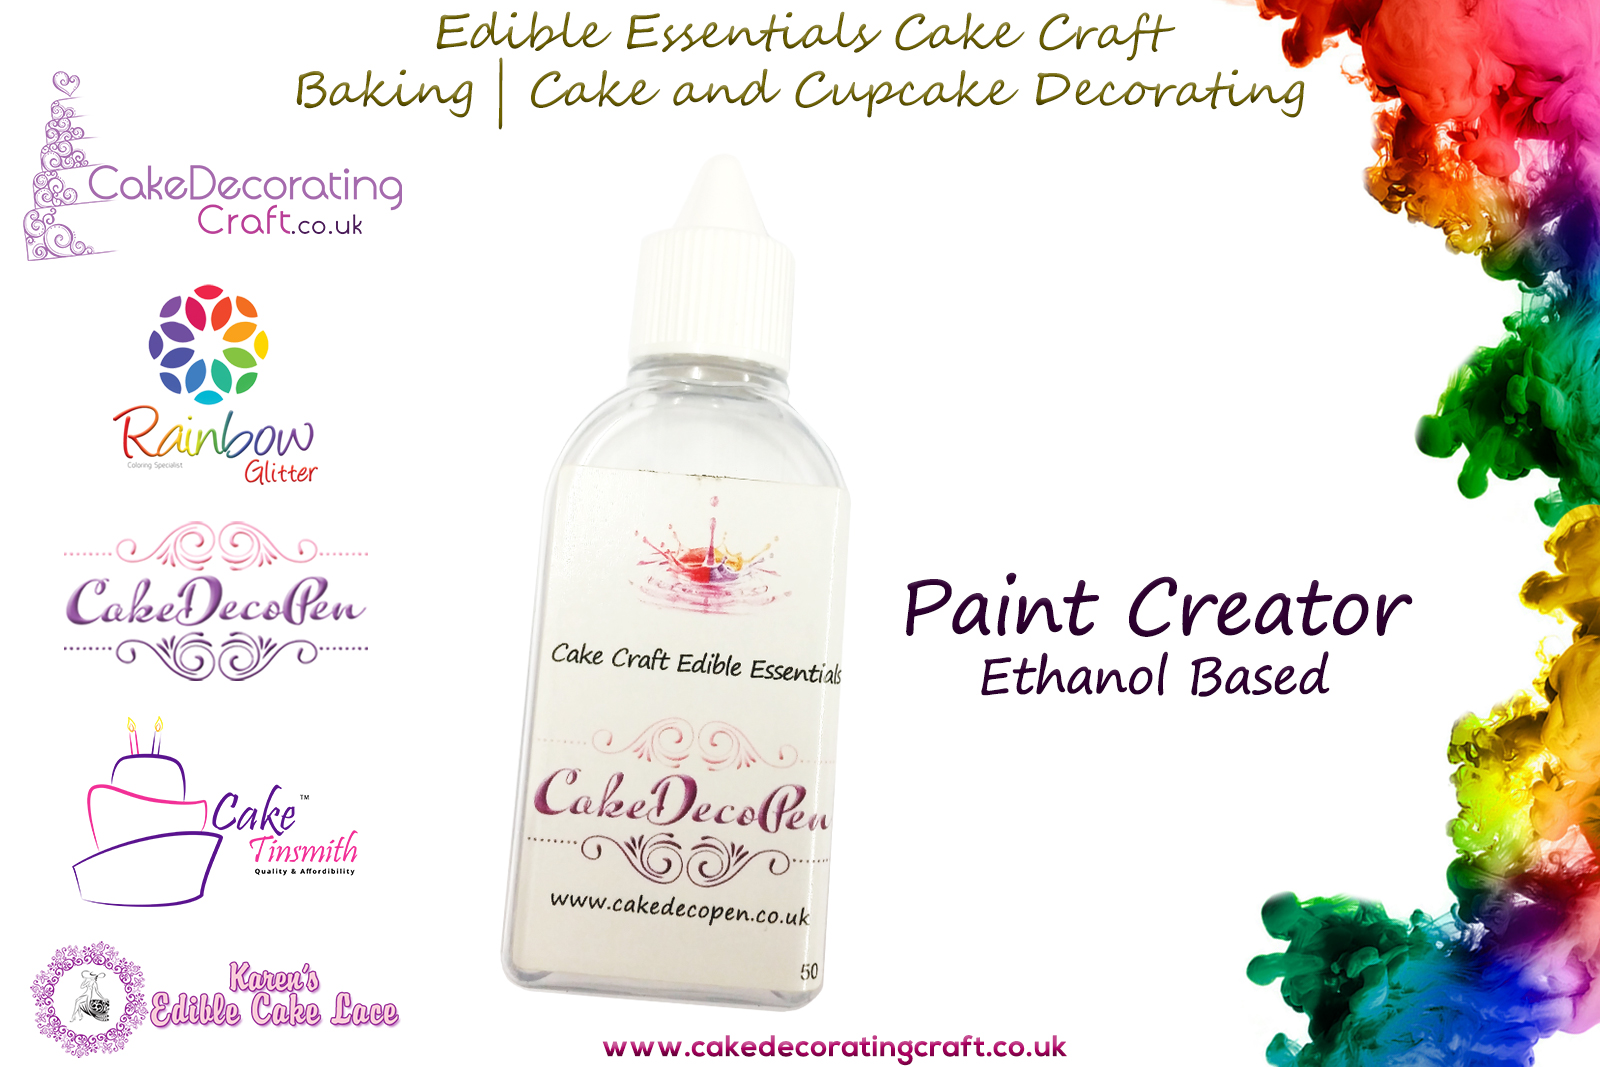 Paint Creator | Ethanol Based | 50 ml | Edible Essentials Baking and Cake Decorating Craft | Great Christmas Bake Off